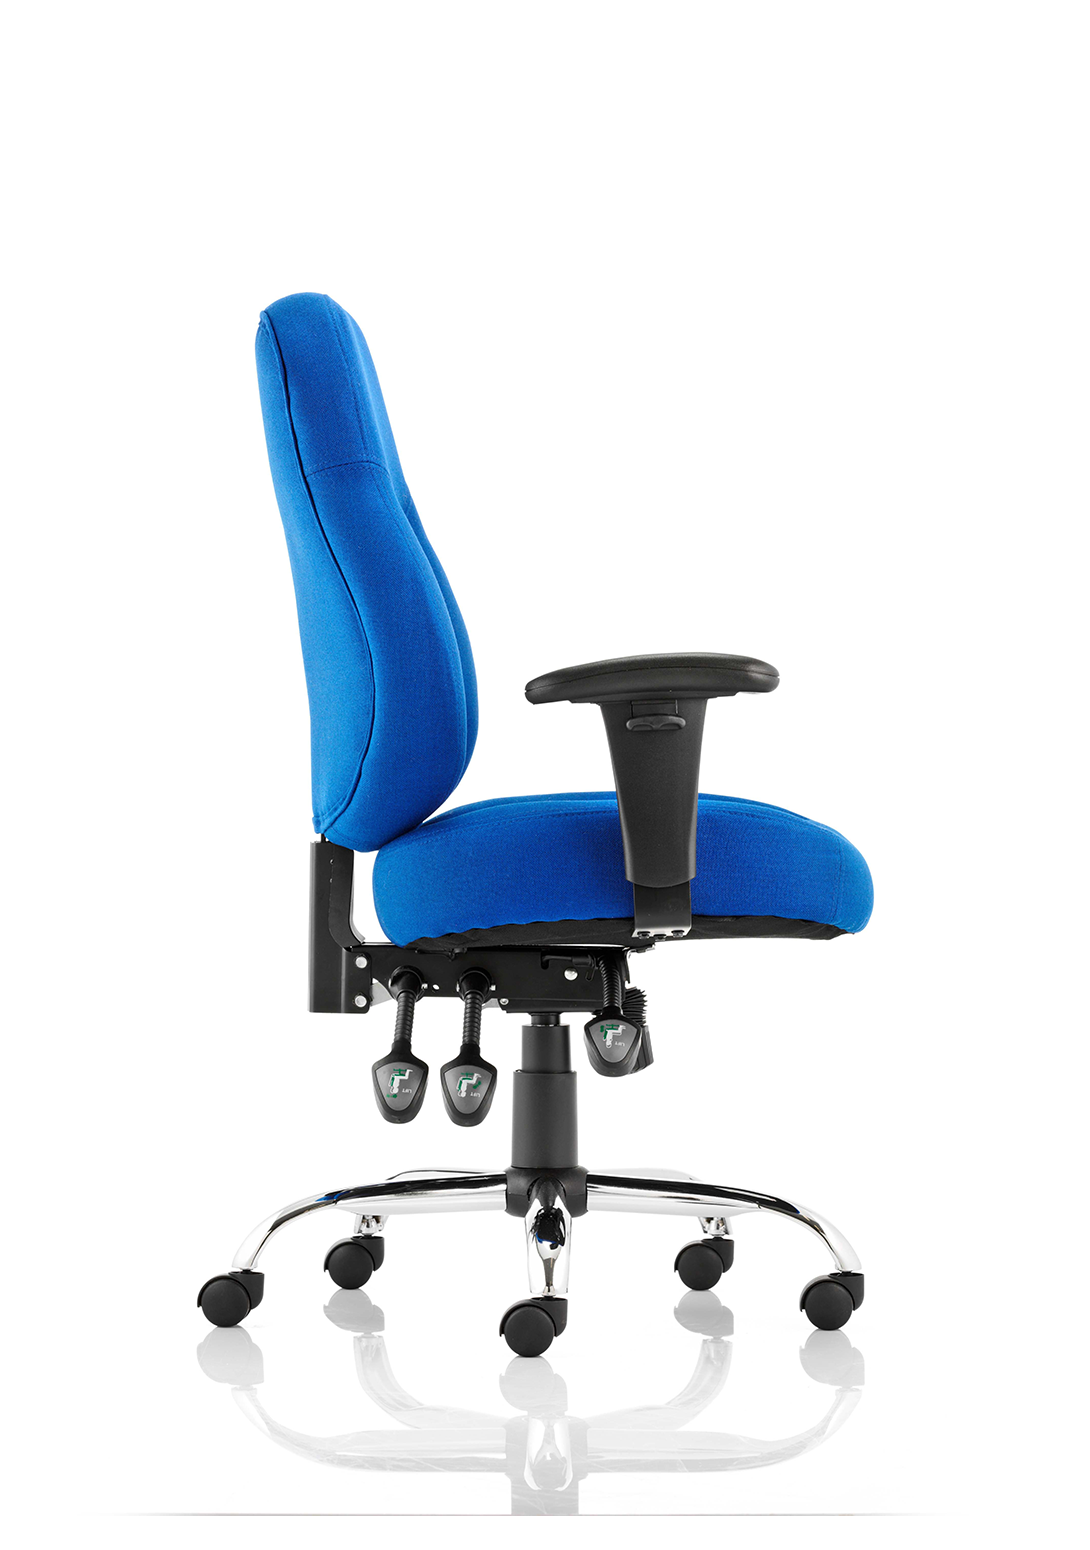 Storm Home Office Chair | Operator Chair | Home Office Furniture | Ergonomic Chair | Ergonomic Office Furniture | Operator Task Chair